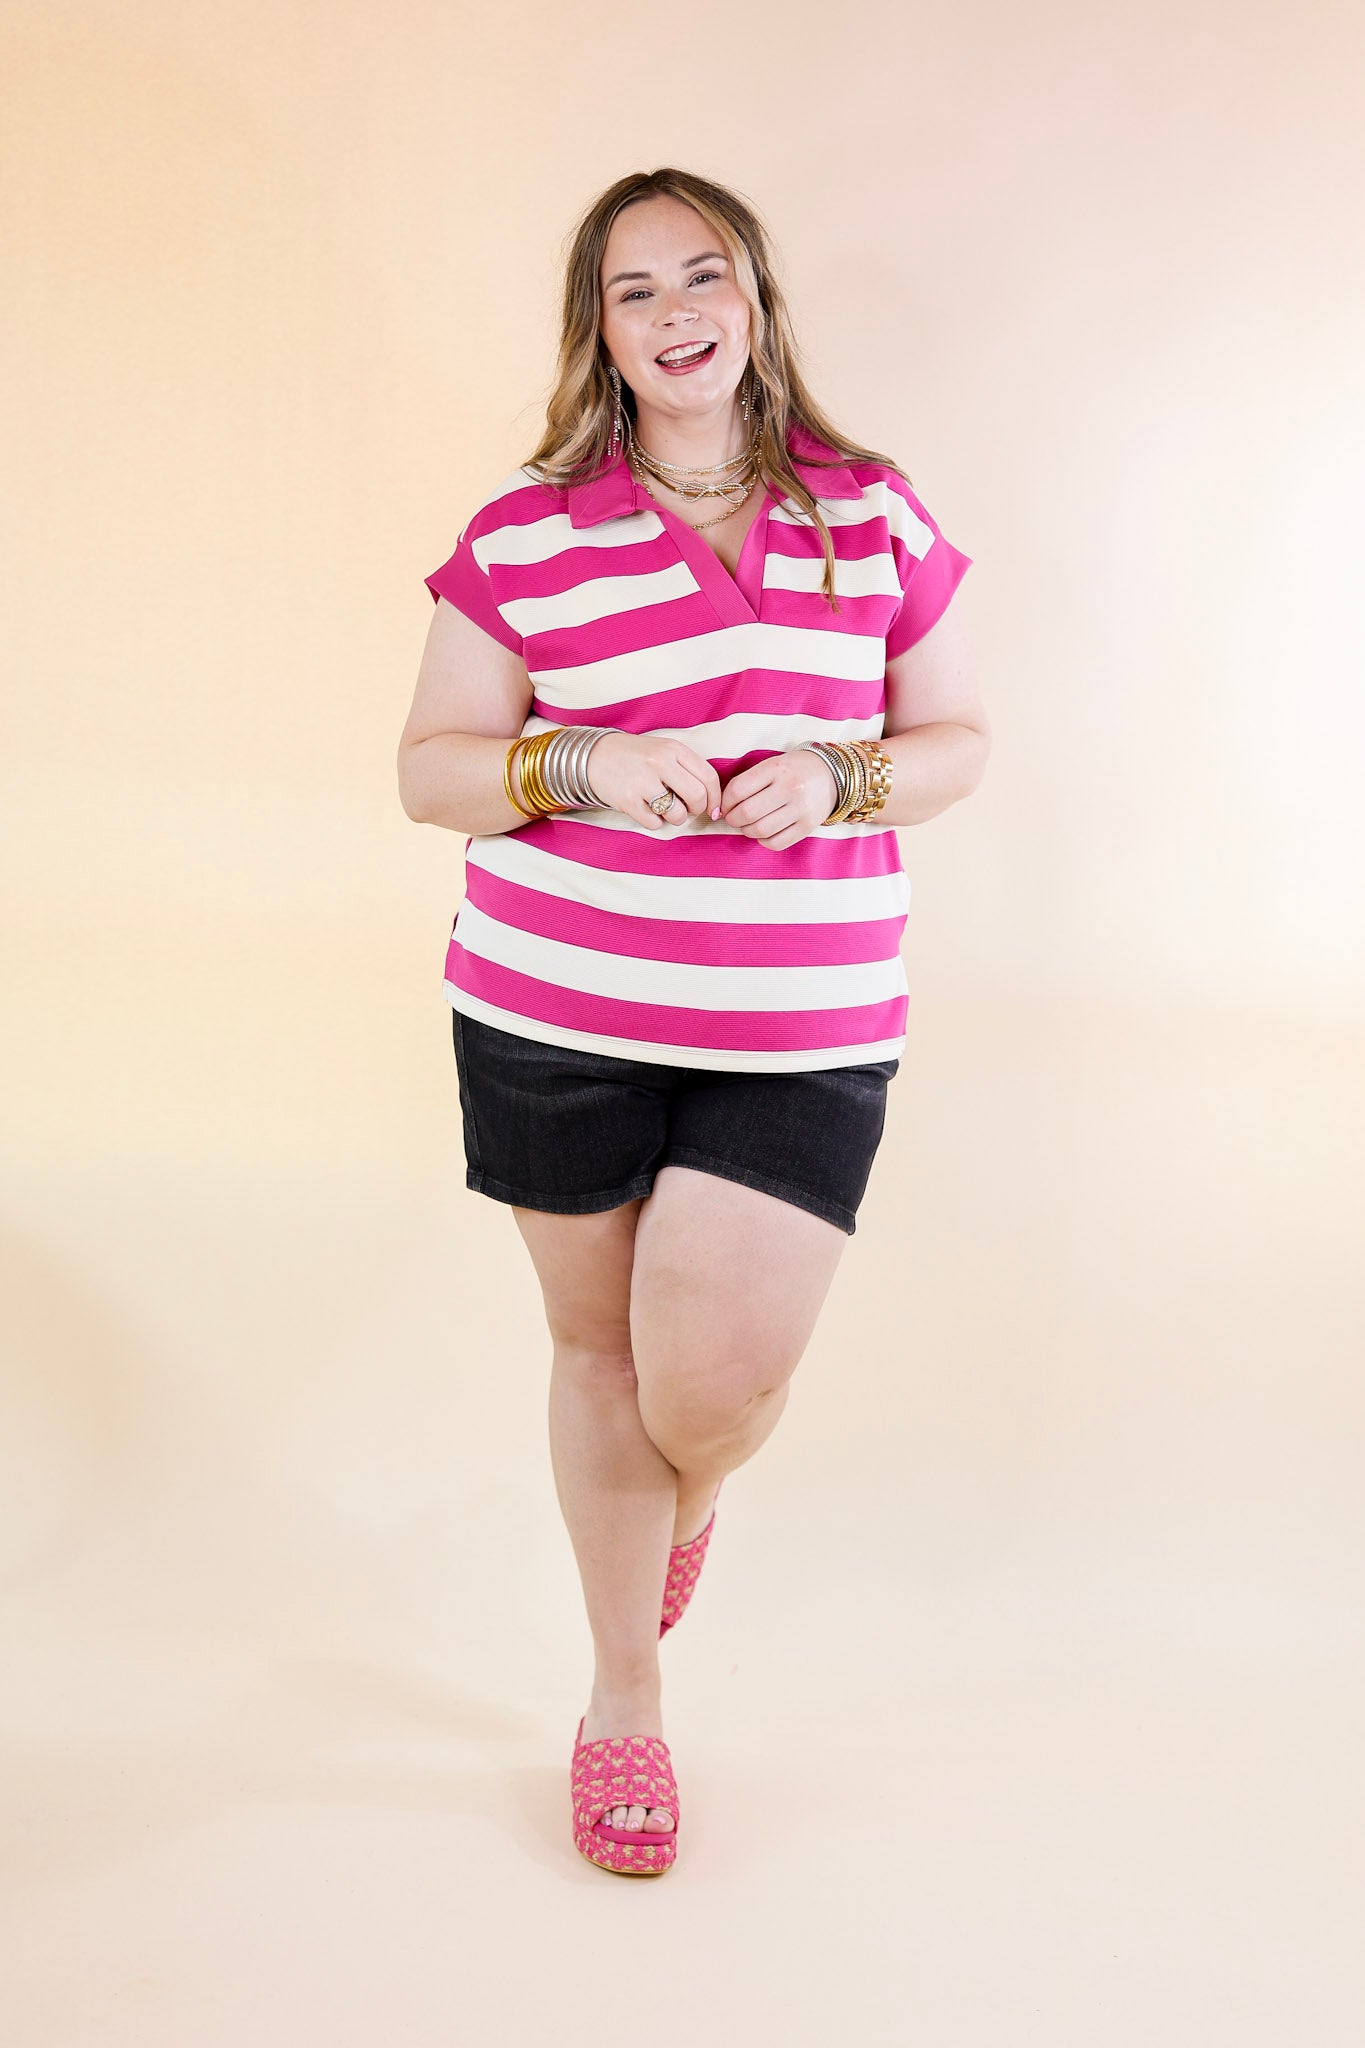 Stripe it Simple Collared Stripe Top with Drop Sleeves in Hot Pink and Cream - Giddy Up Glamour Boutique